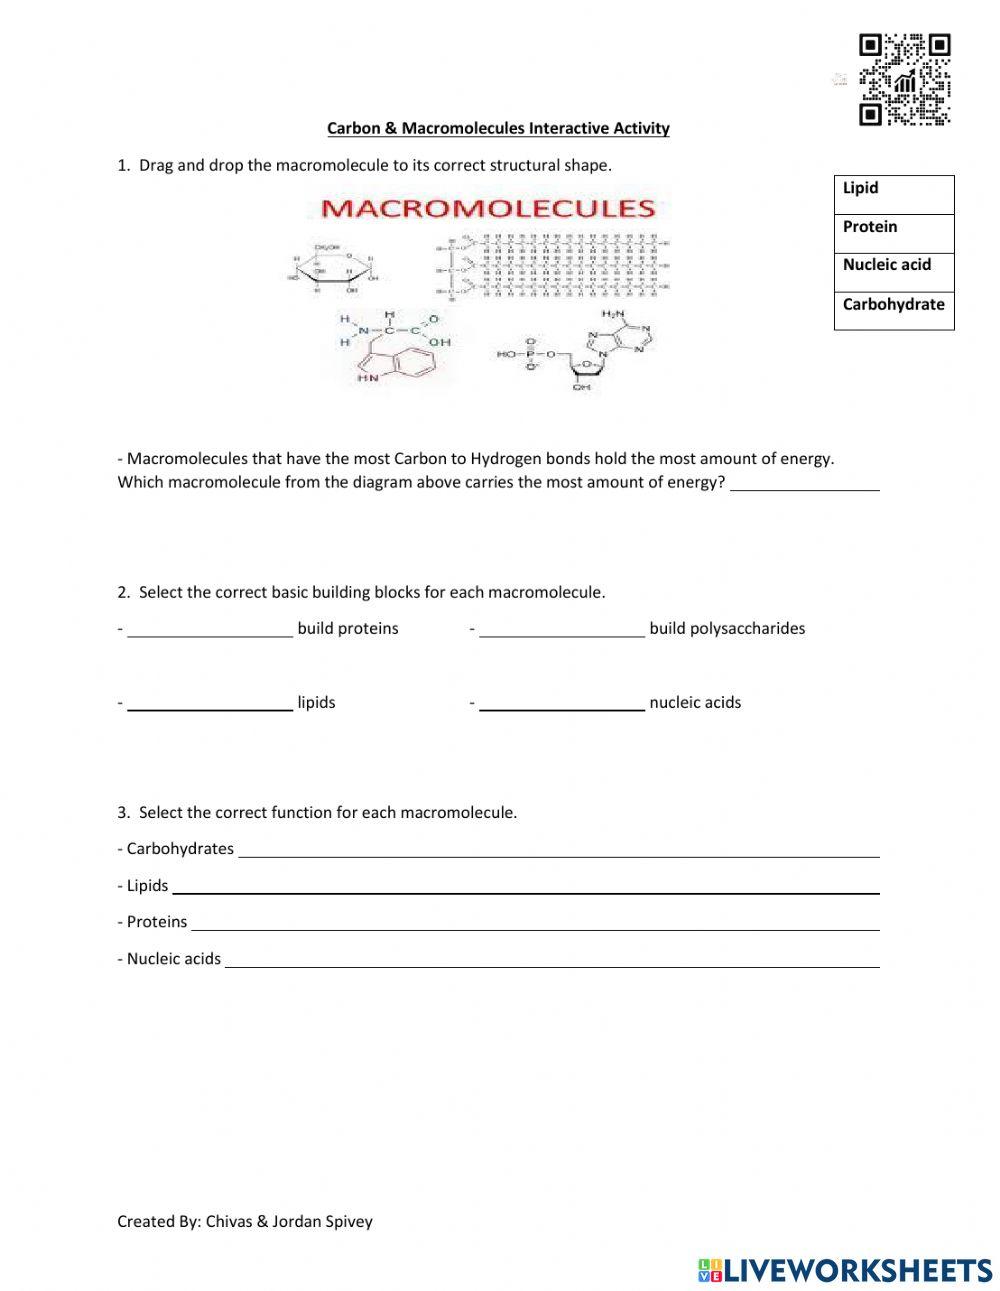 Macromolecules interactive activity with video and quiz